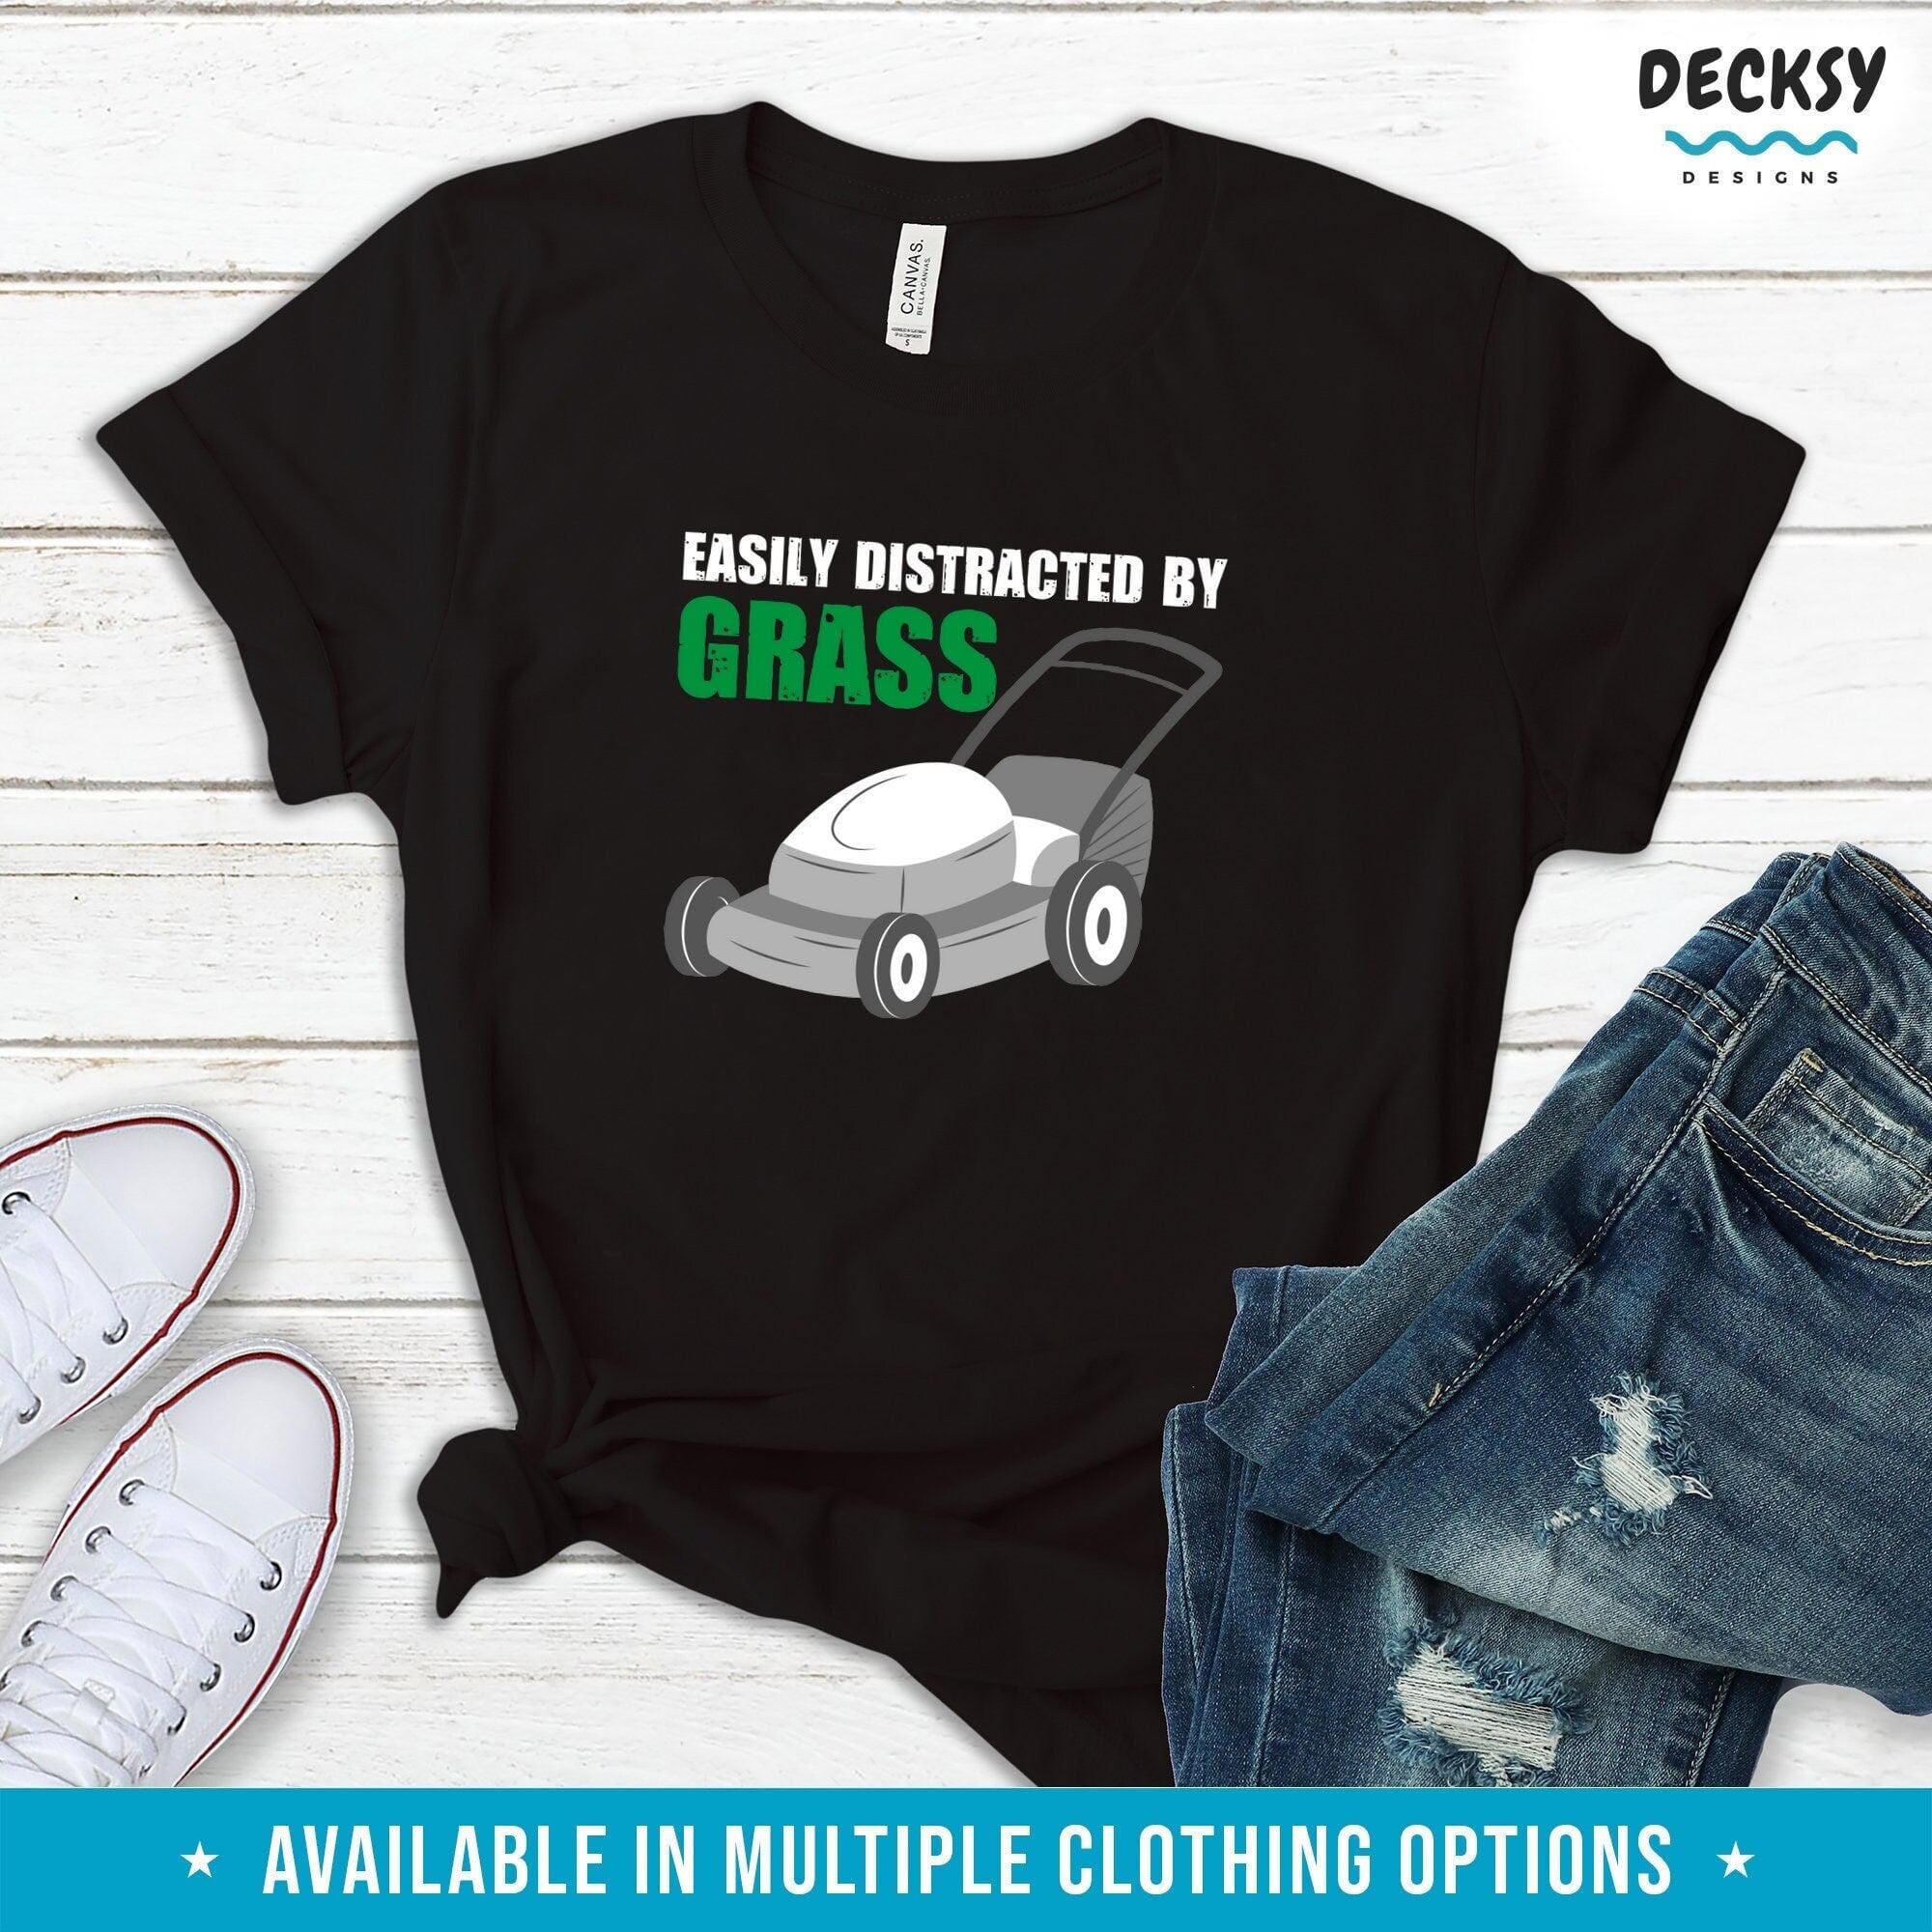 Lawn Mowing Shirt, Gift For Gardener-Clothing:Gender-Neutral Adult Clothing:Tops & Tees:T-shirts:Graphic Tees-DecksyDesigns